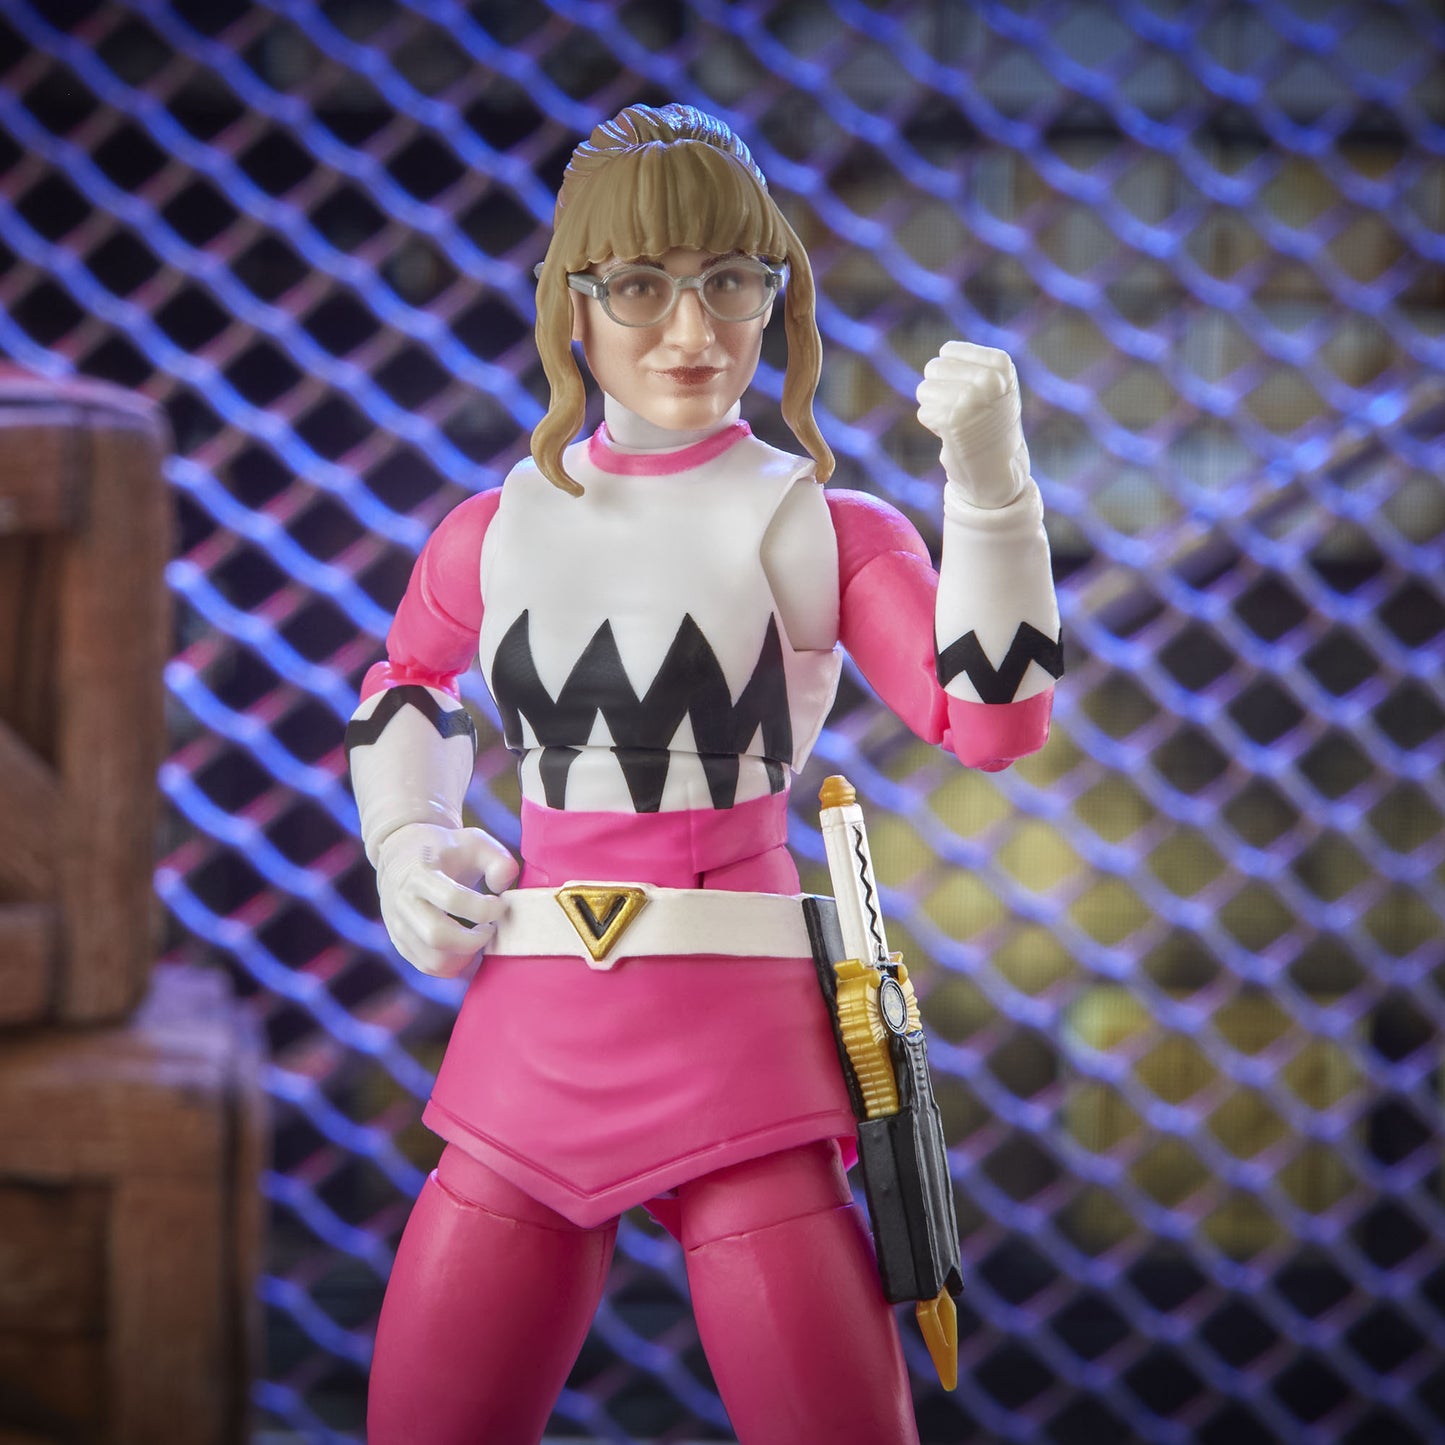 Power Rangers Lightning Collection Lost Galaxy Pink Ranger Figure Toy close up look - Heretoserveyou